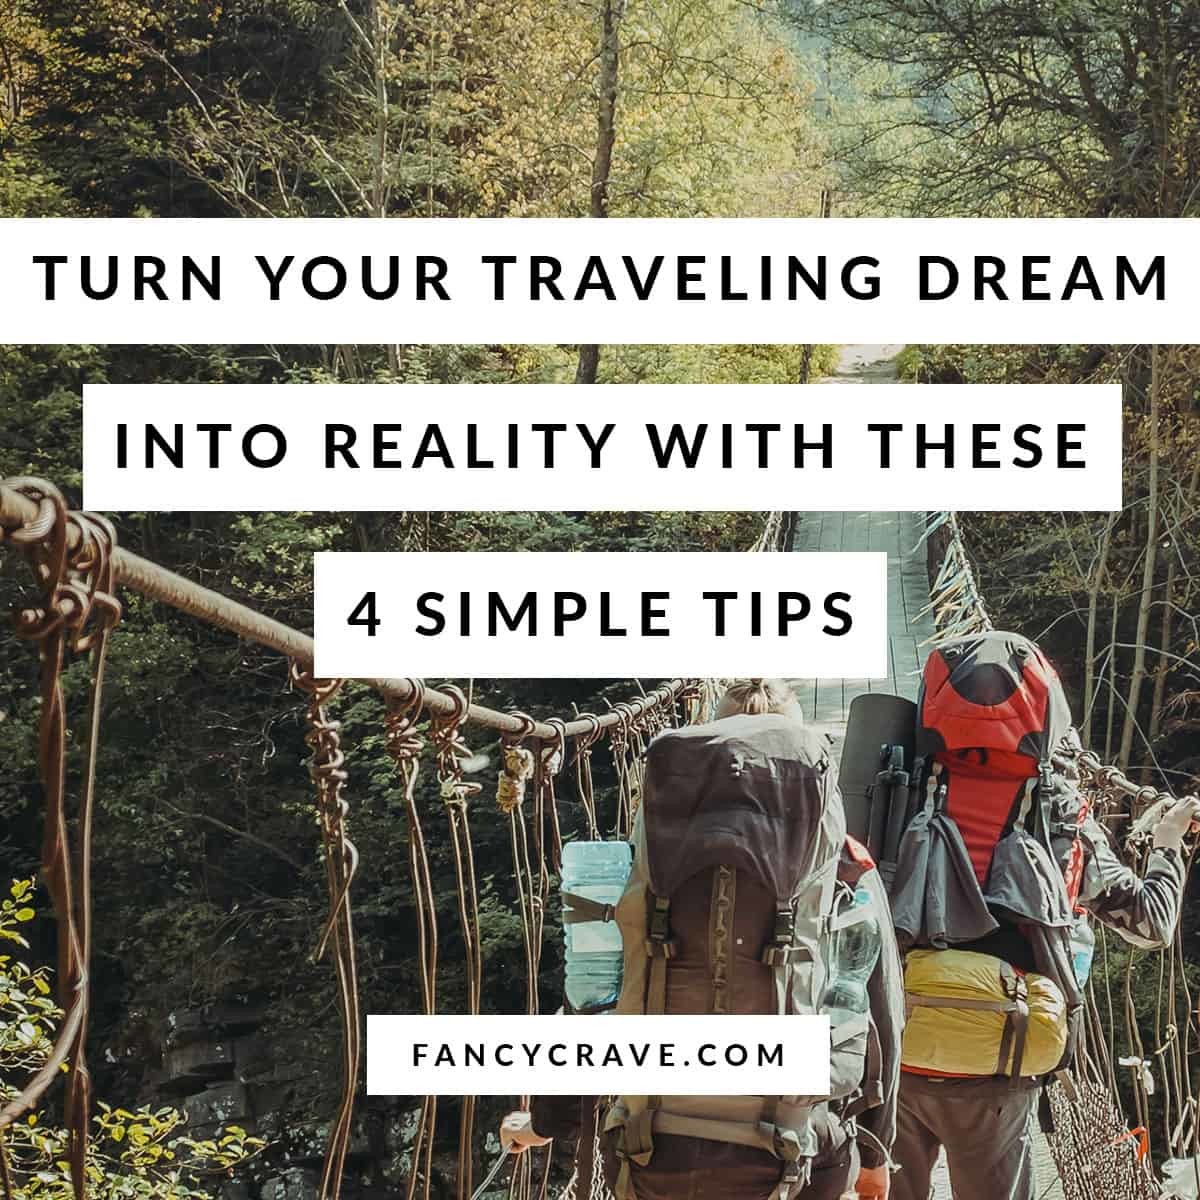 Turn Your Traveling Dream into Reality